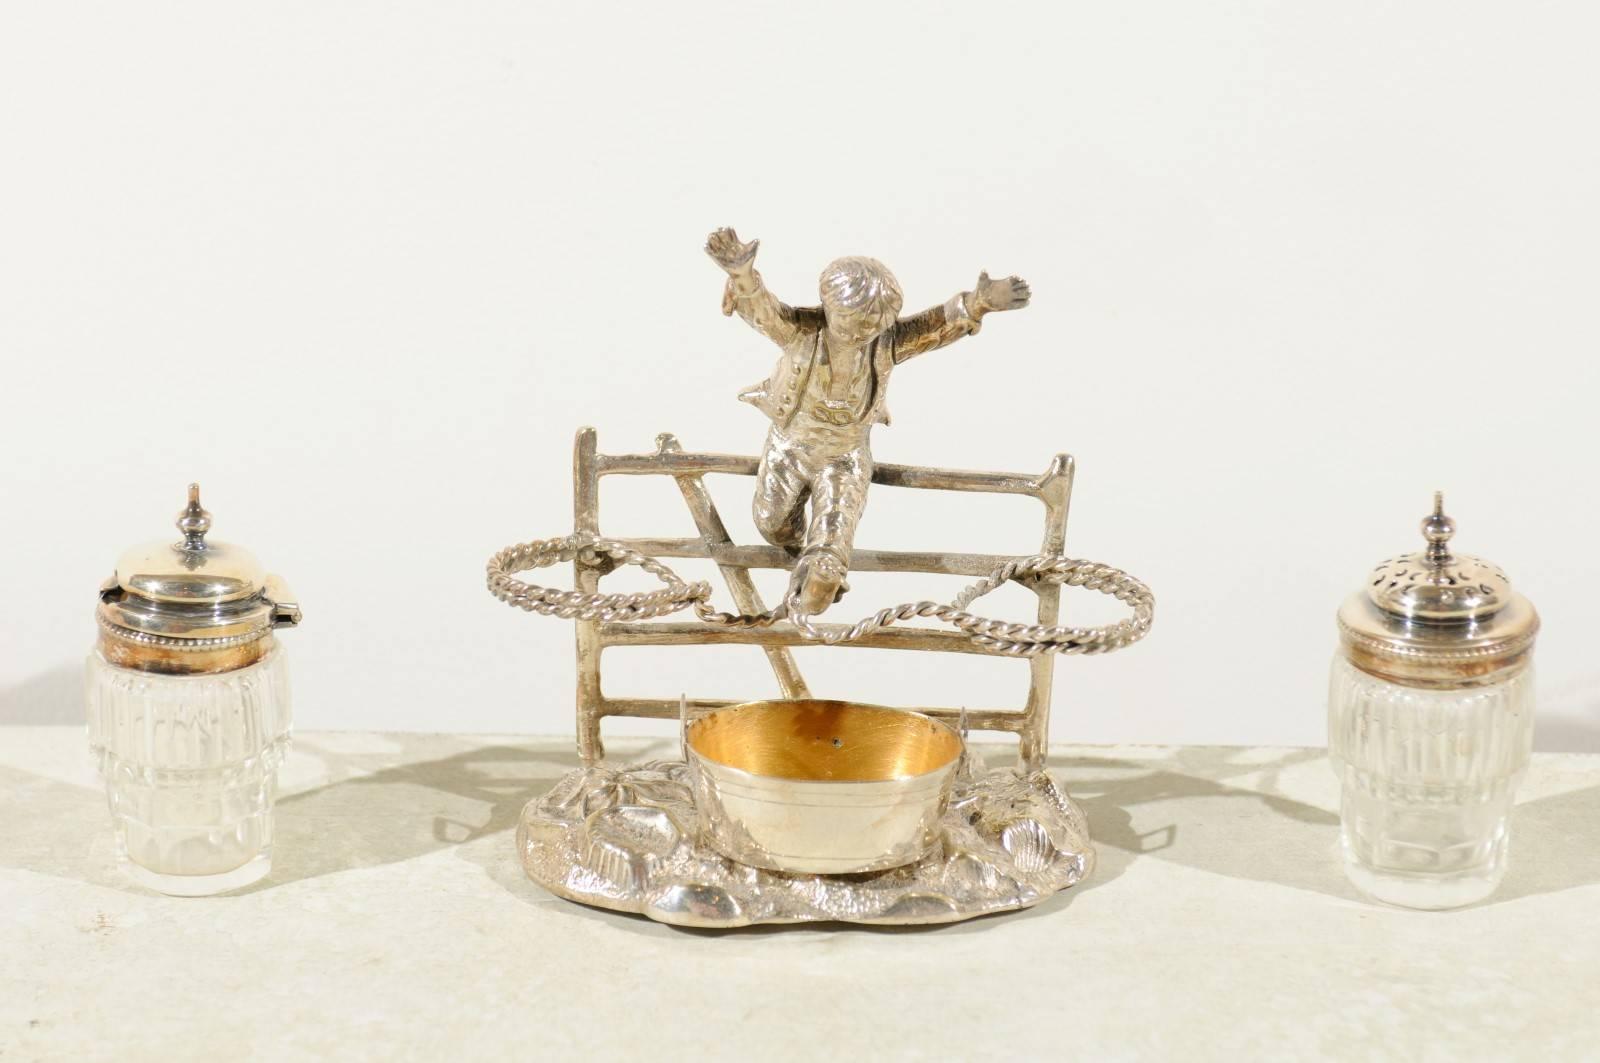 English Silver Plated Cruet Set of Young Boy Leaping in the Air, circa 1873 For Sale 2